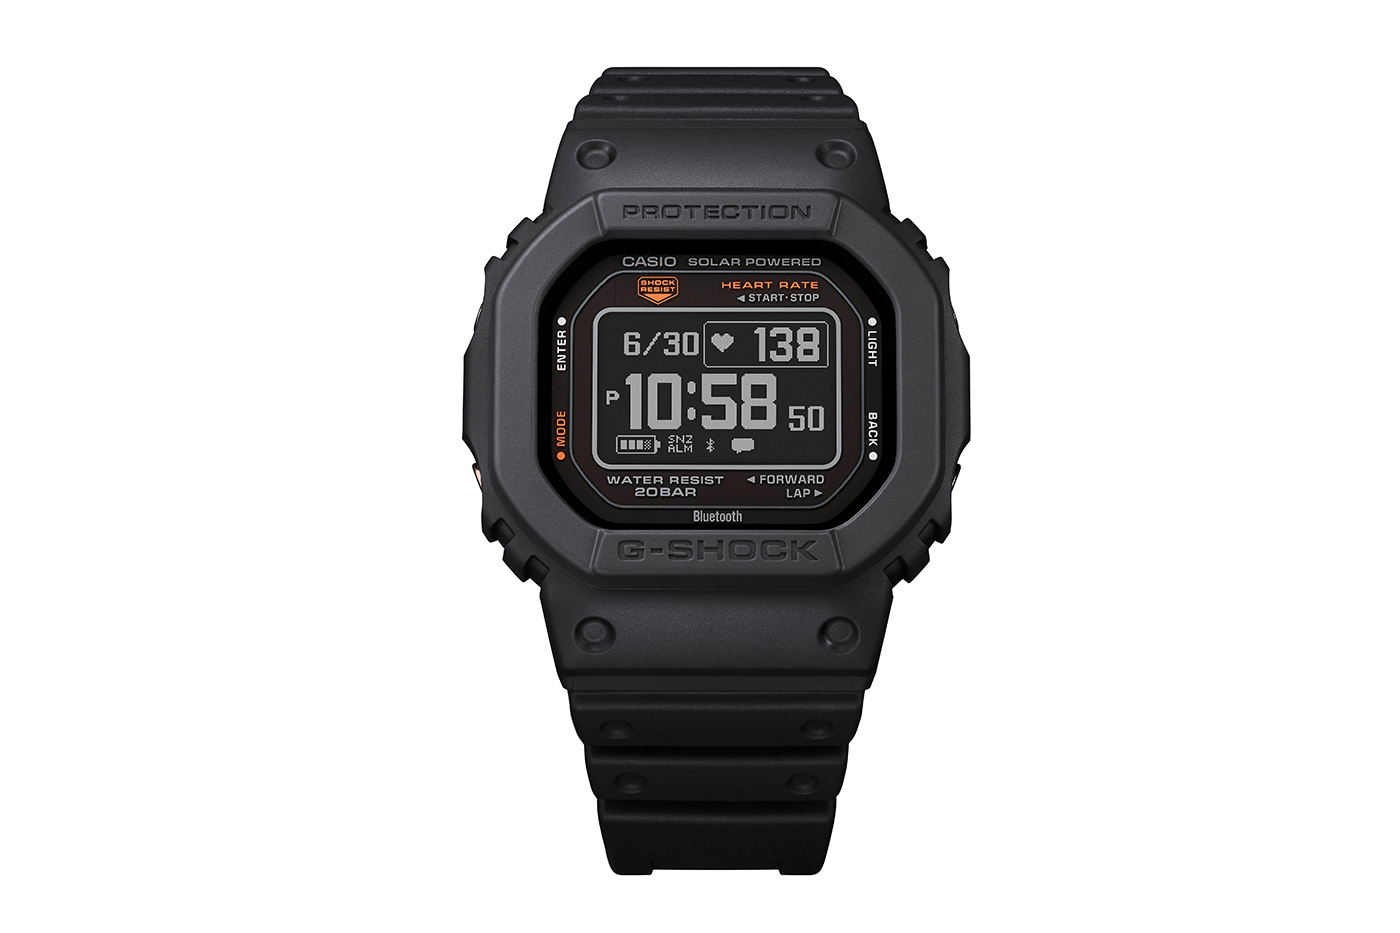 G-SHOCK G-SQUAD DW-H5600 Watch Release Info